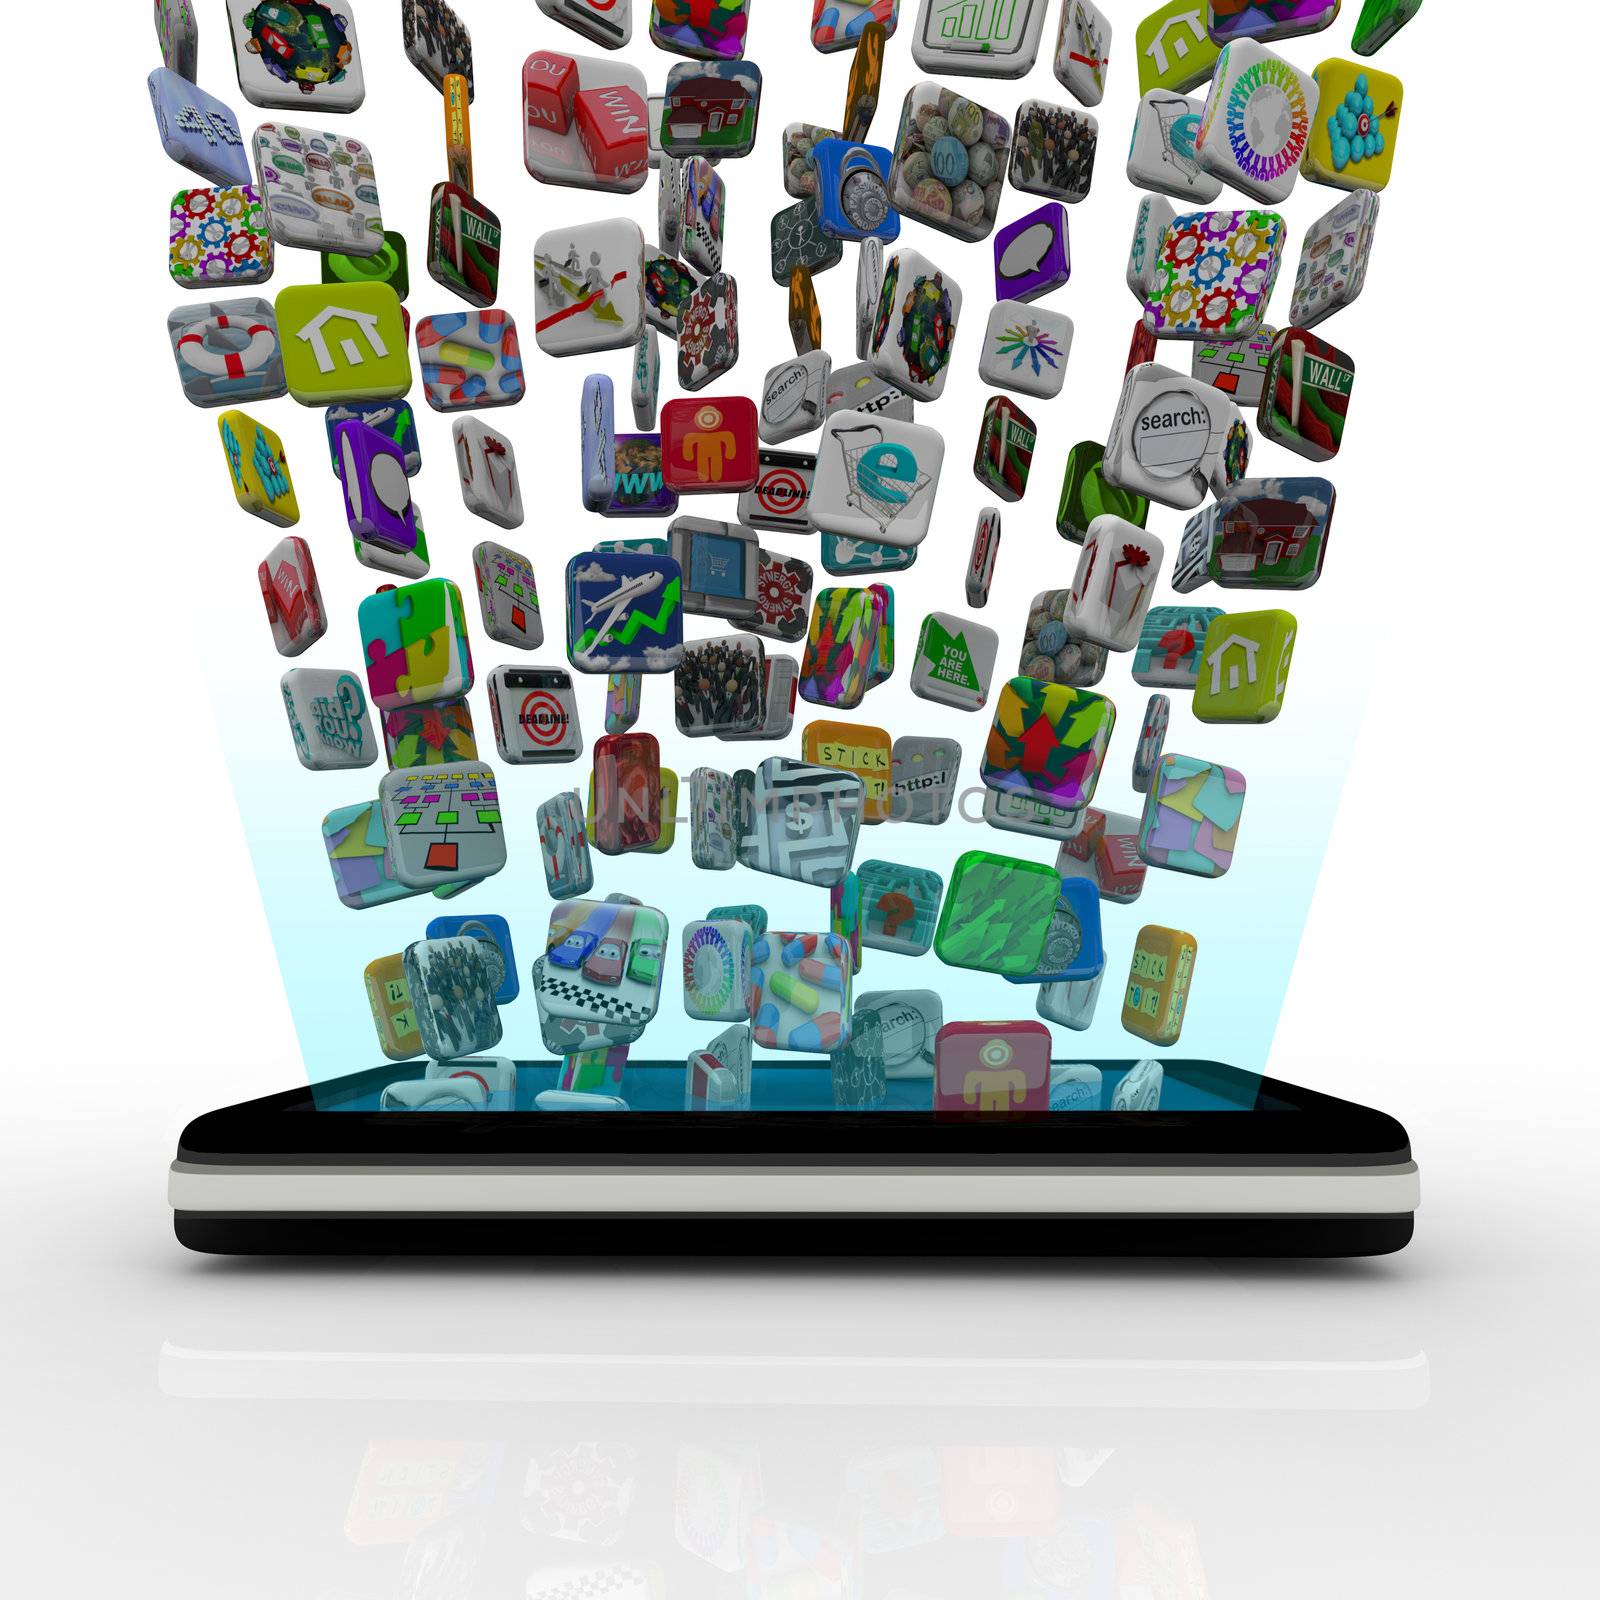 Many application icons are downloaded into a modern black smart phone, appearing to float over the device